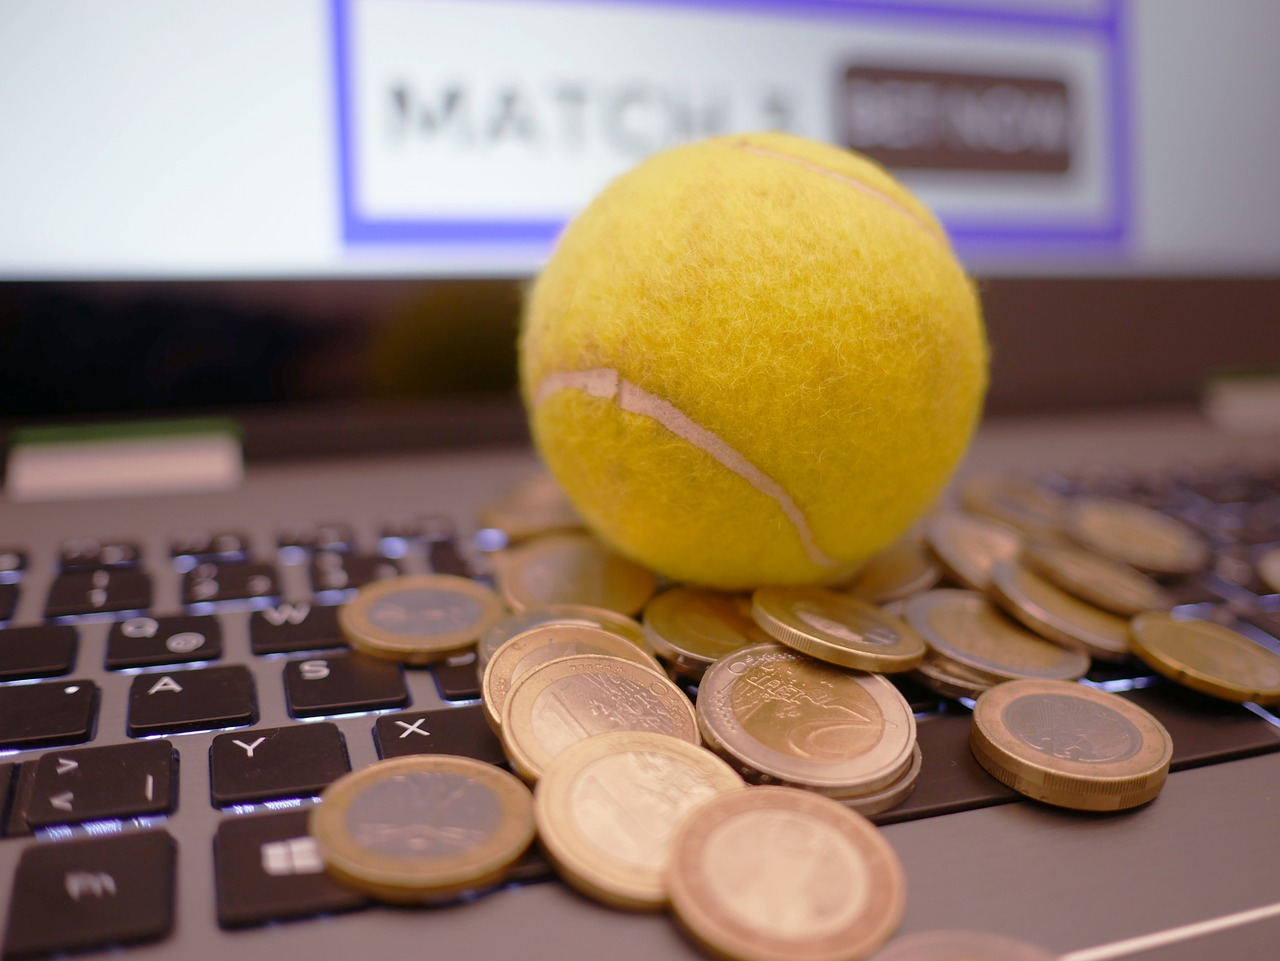 A depiction of online tennis betting